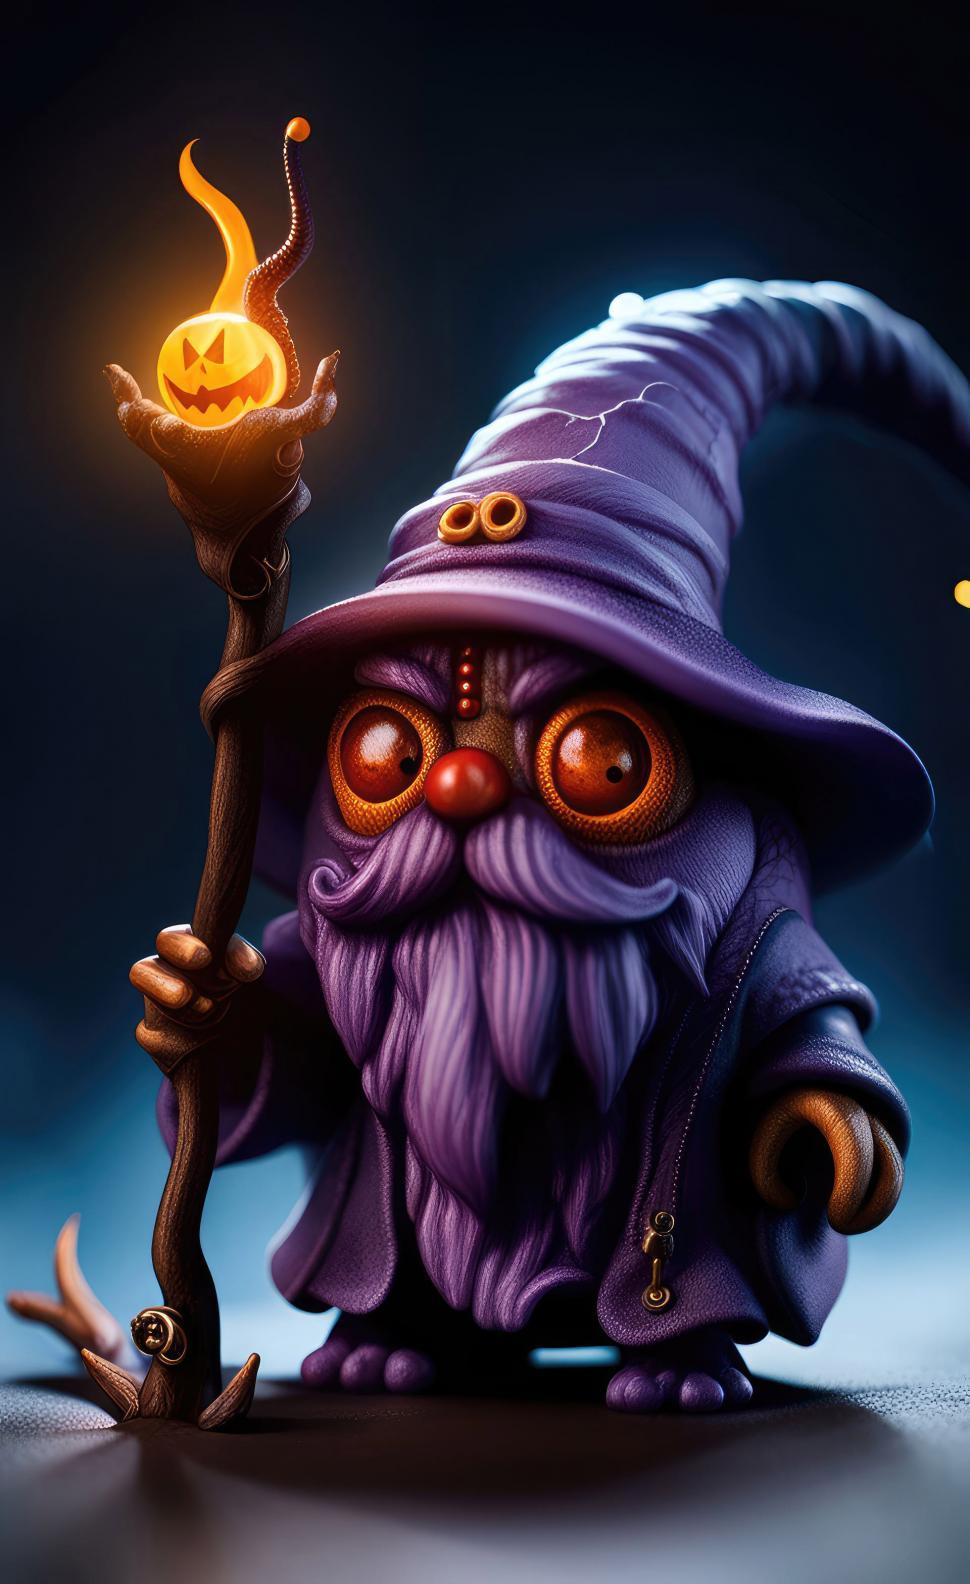 Free Image of Spooky halloween wizard character  